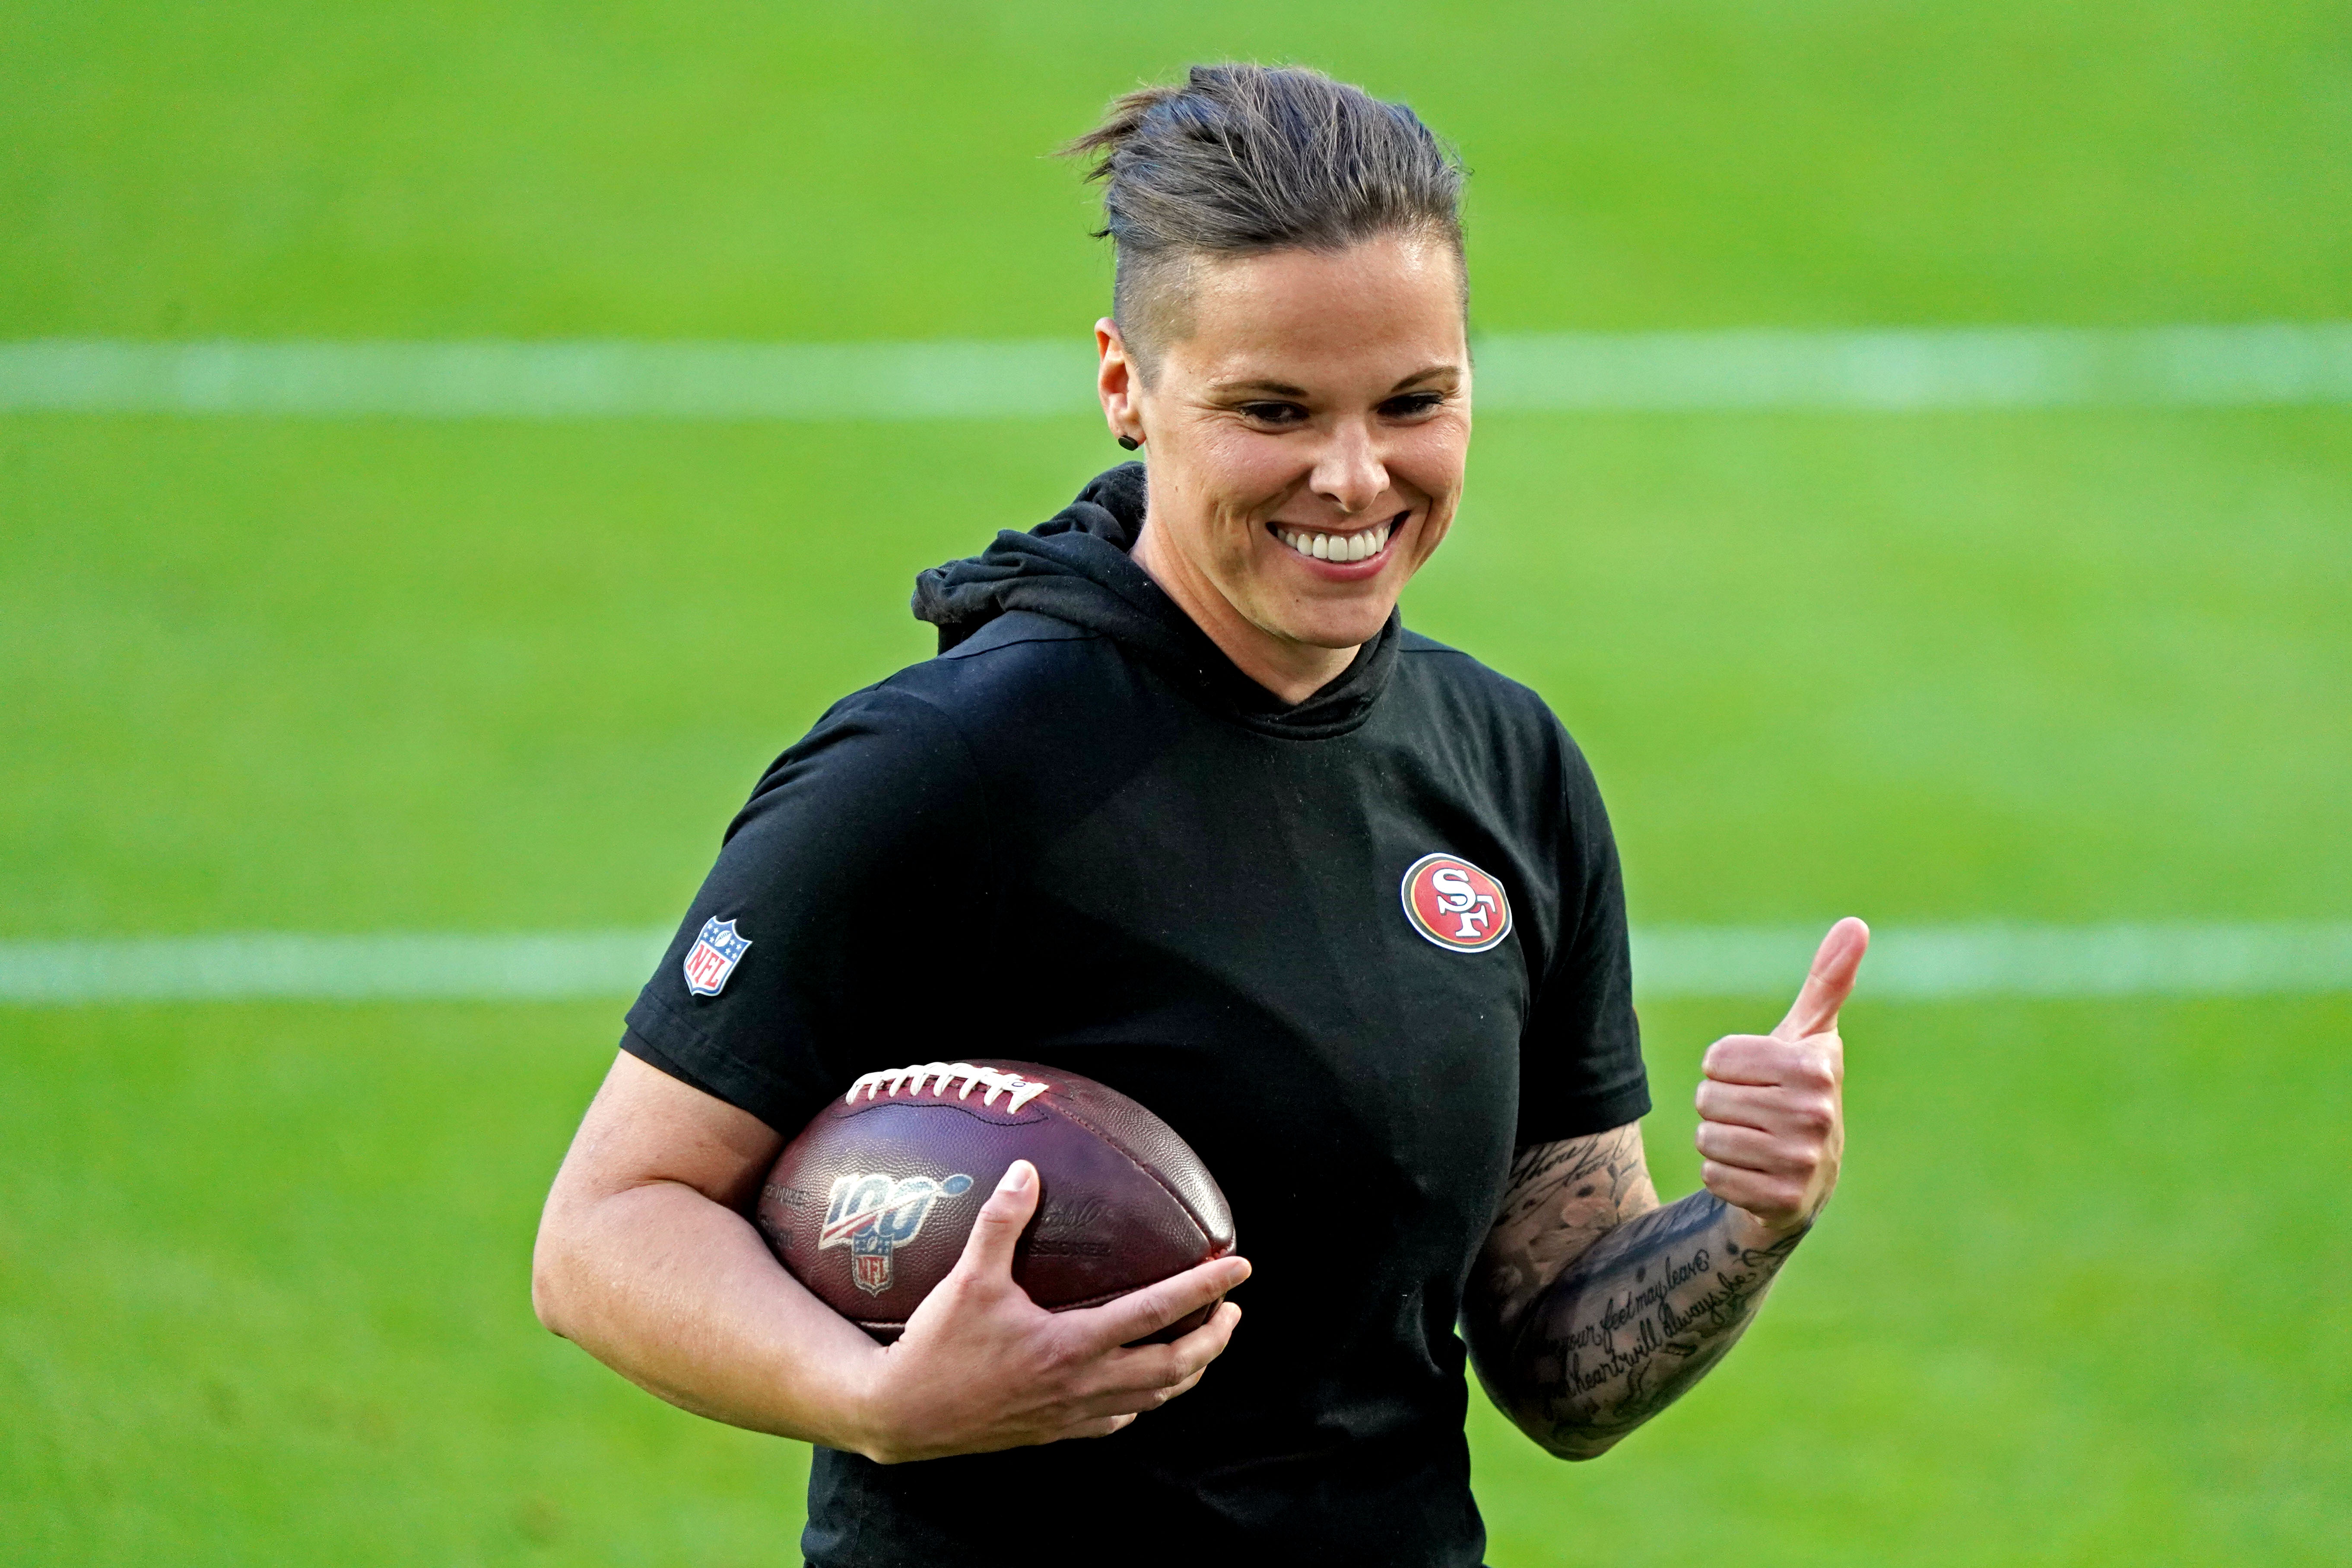 Katie Sowers on the field prior to Super Bowl LIV on Feb. 2, 2020.